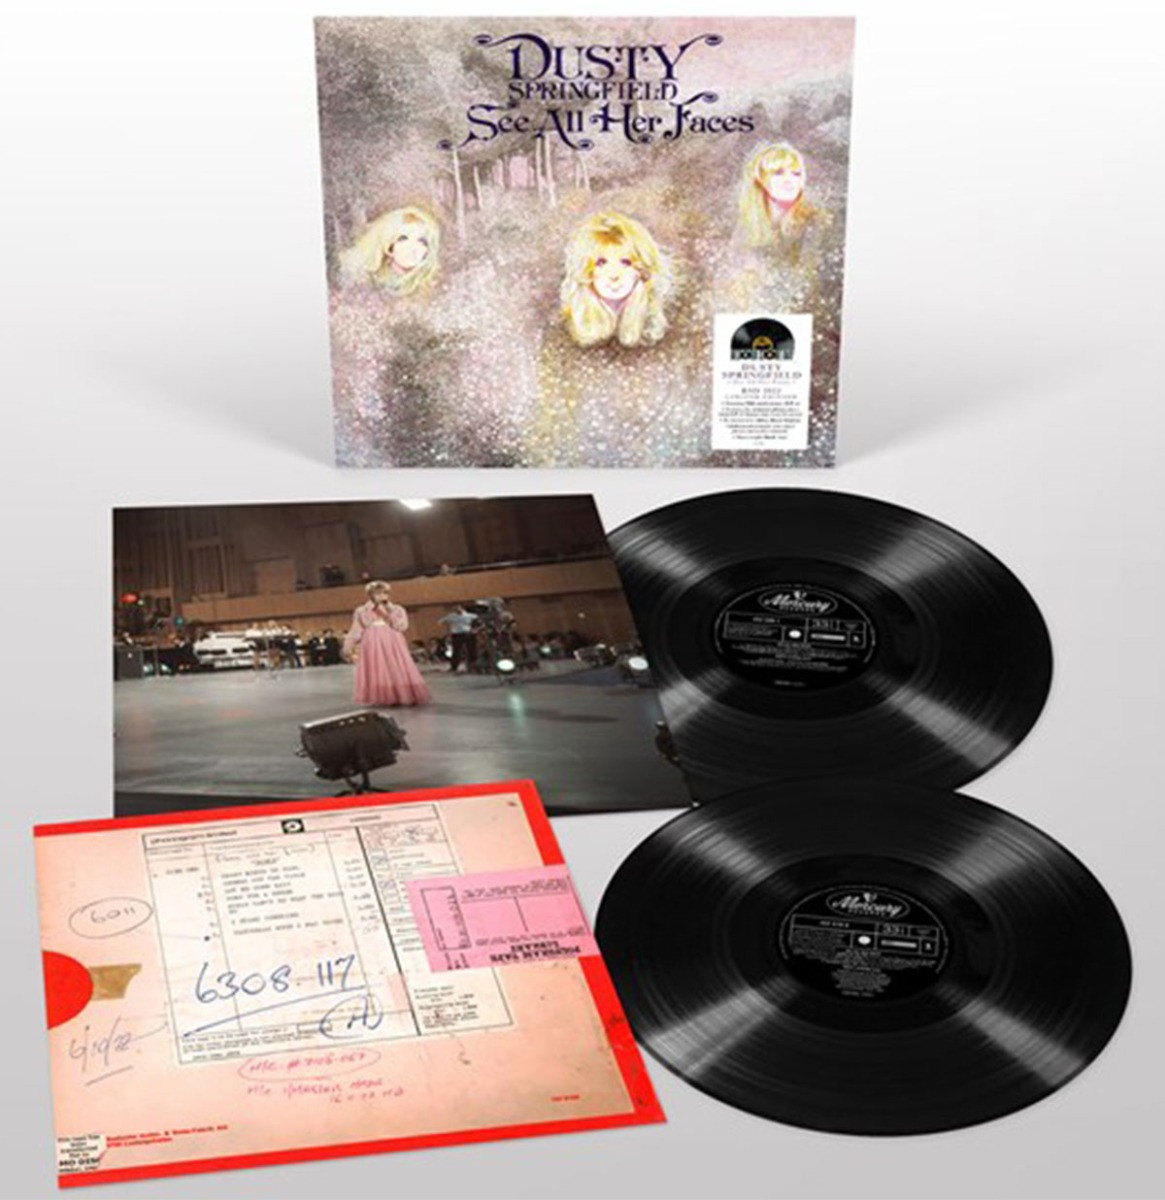 Dusty Springfield - See All Her Faces (50th Anniversary Edition) 2LP (Record Store Day 2022)